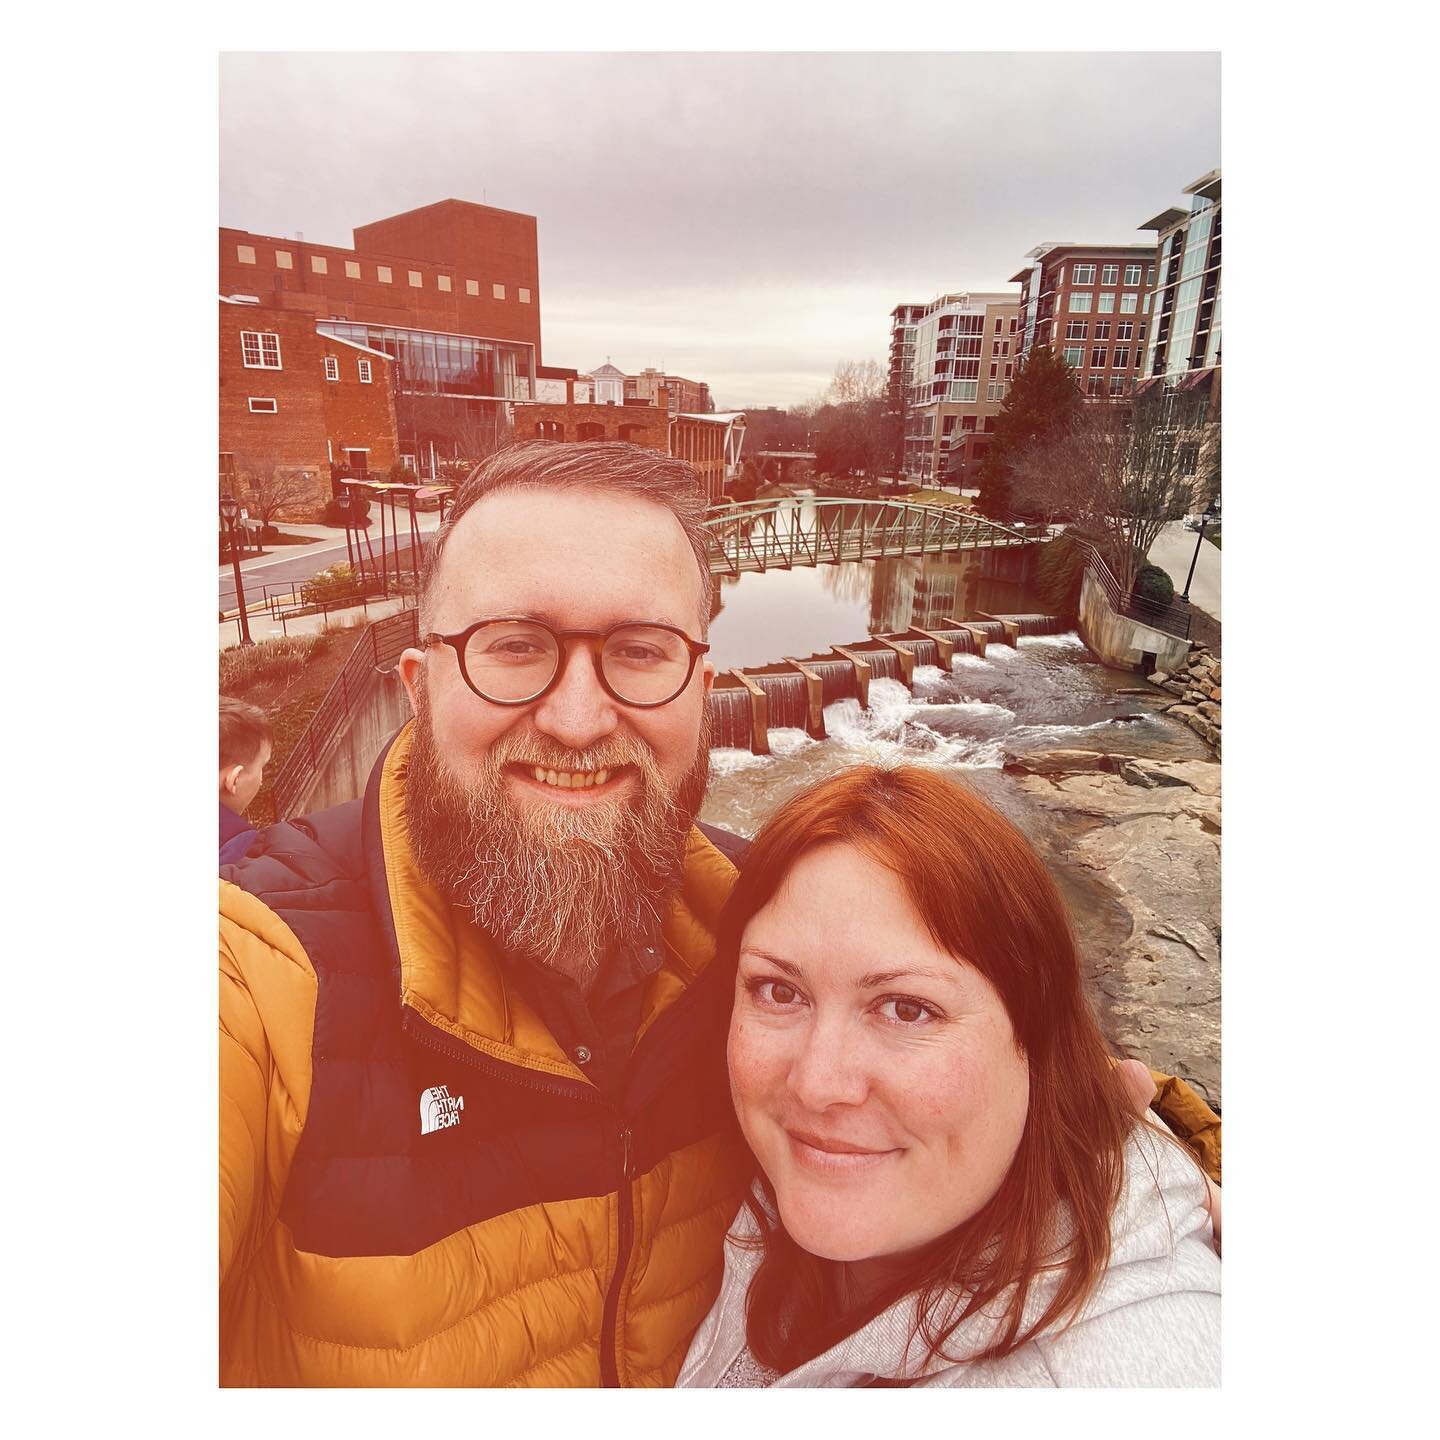 Quick intro post. 👋
My name is arin gilbert, owner of violet crown coffee company based in Greenville, SC. My wife and I recently relocated our family and businesses to the upstate and have been getting acquainted with the city. What a lovely area G